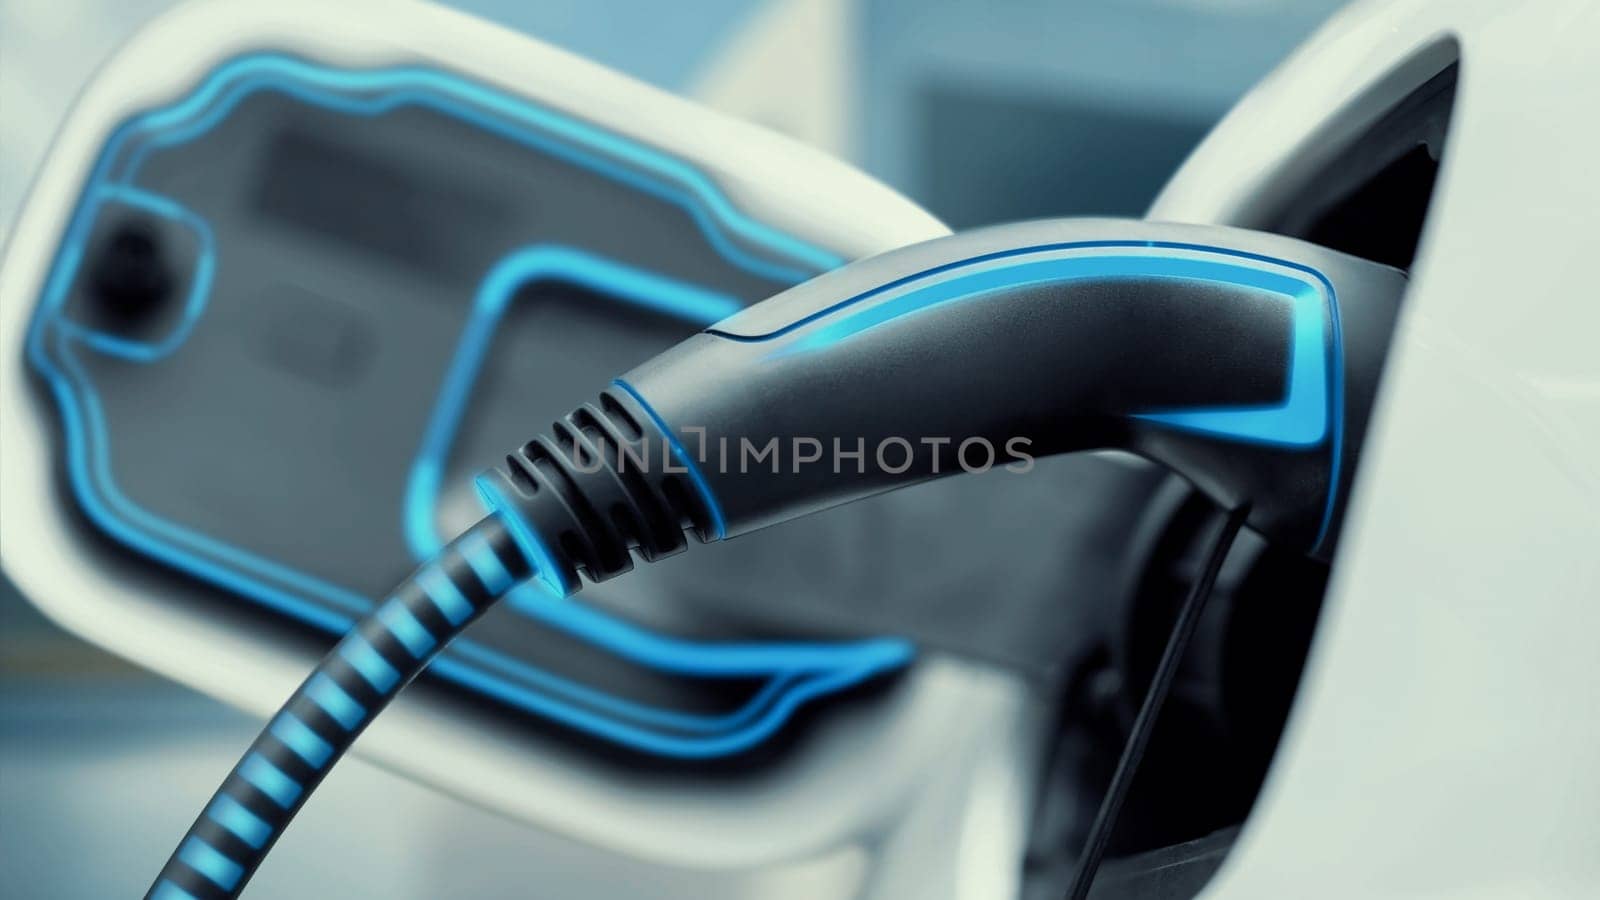 Future EV charger plugged into electric car for electric recharging. Peruse by biancoblue